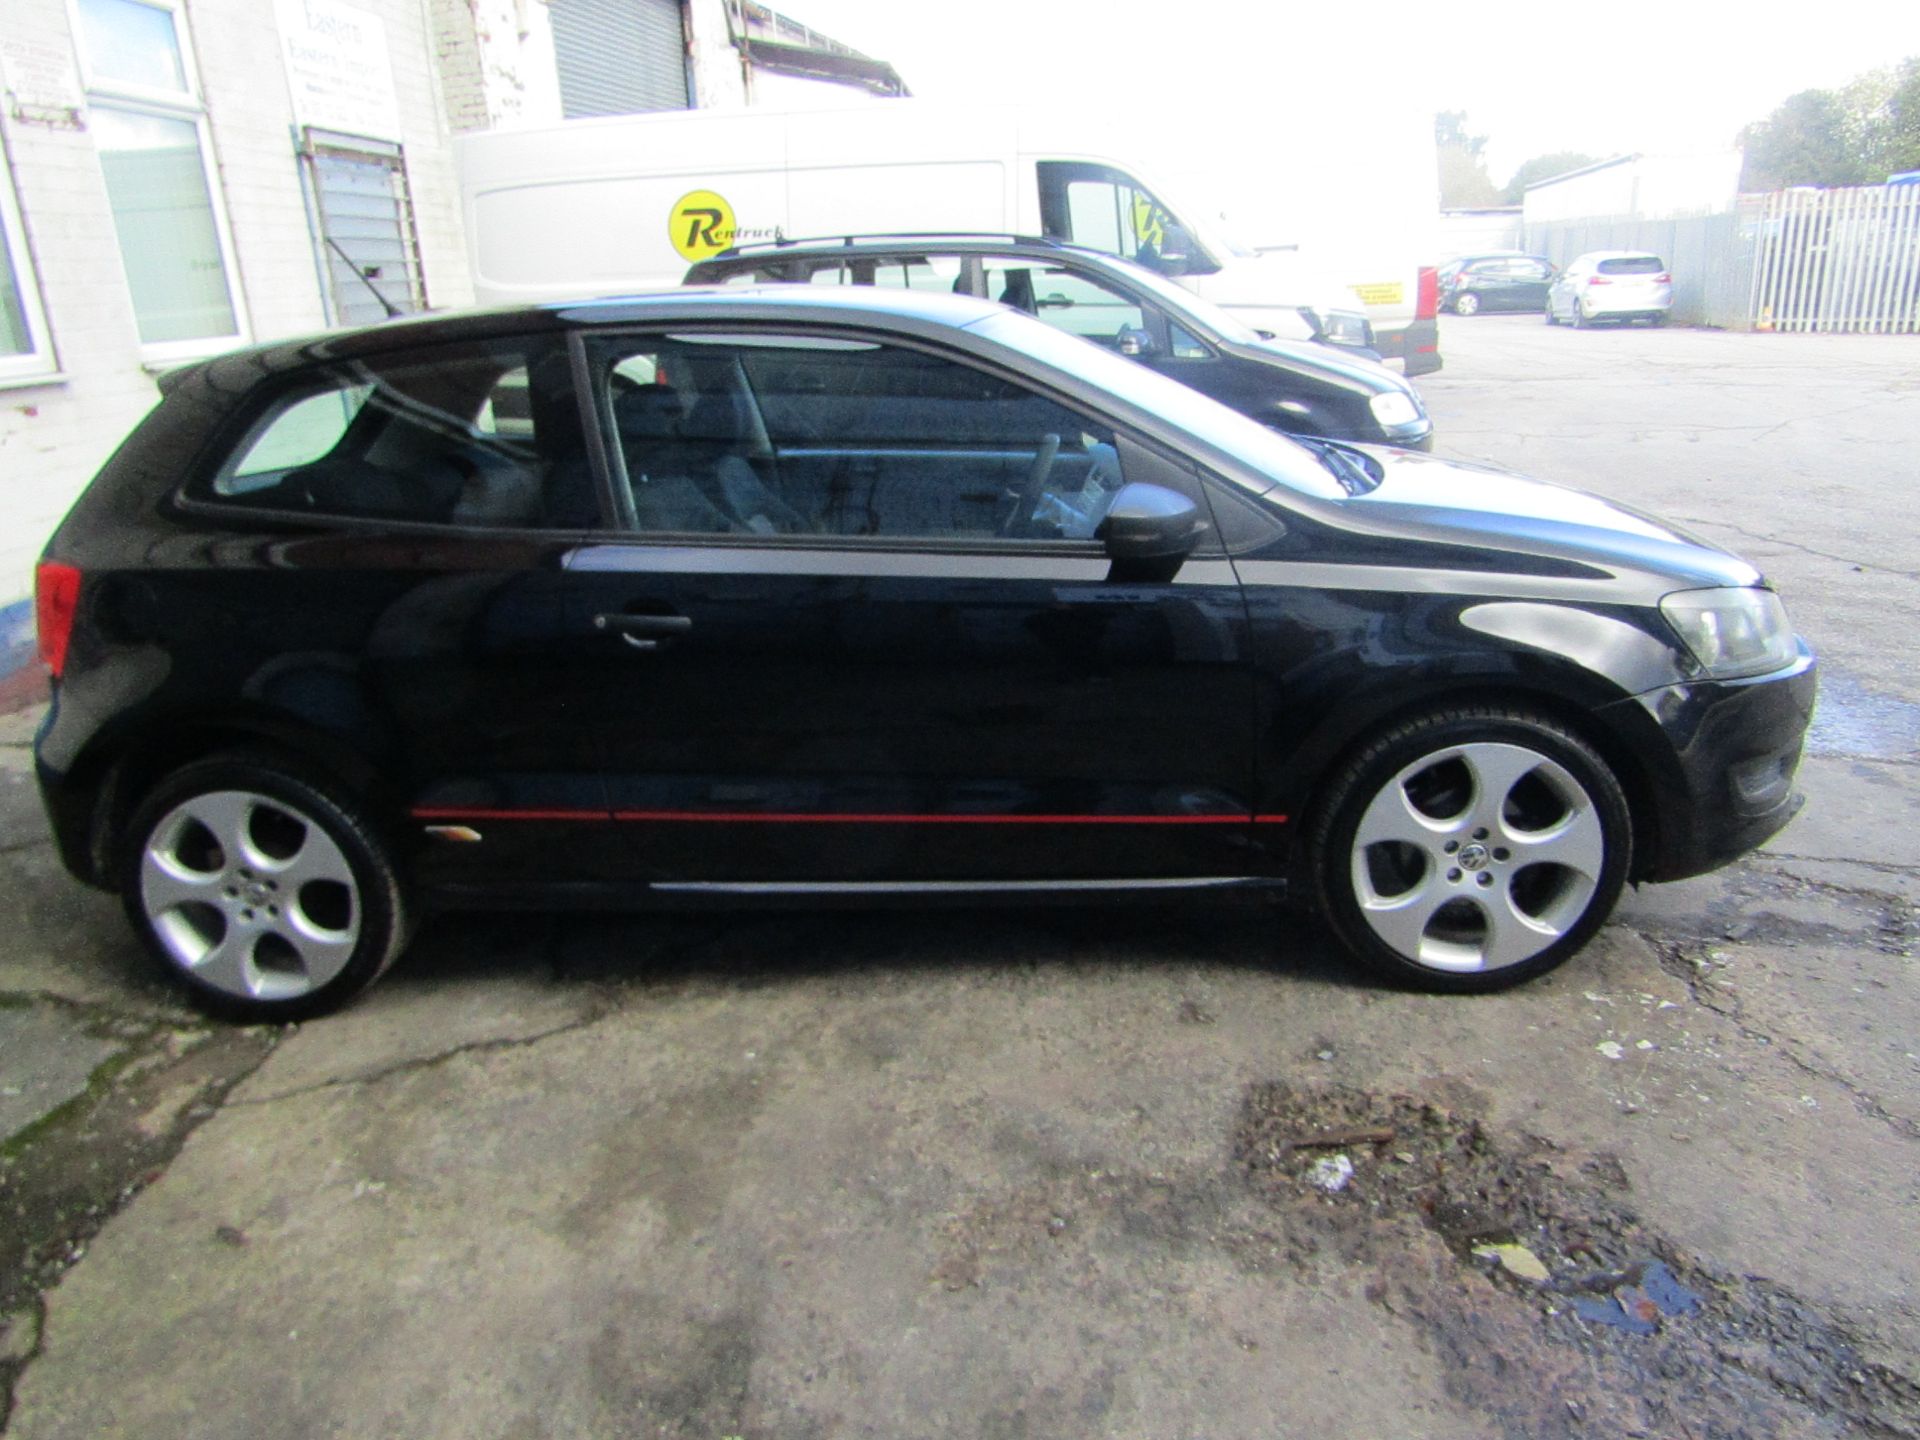 60 plate Volkswagen Polo S 70, 1.2i, 119,551 miles (unchecked), MOT Until 9th May 2023, Starts and